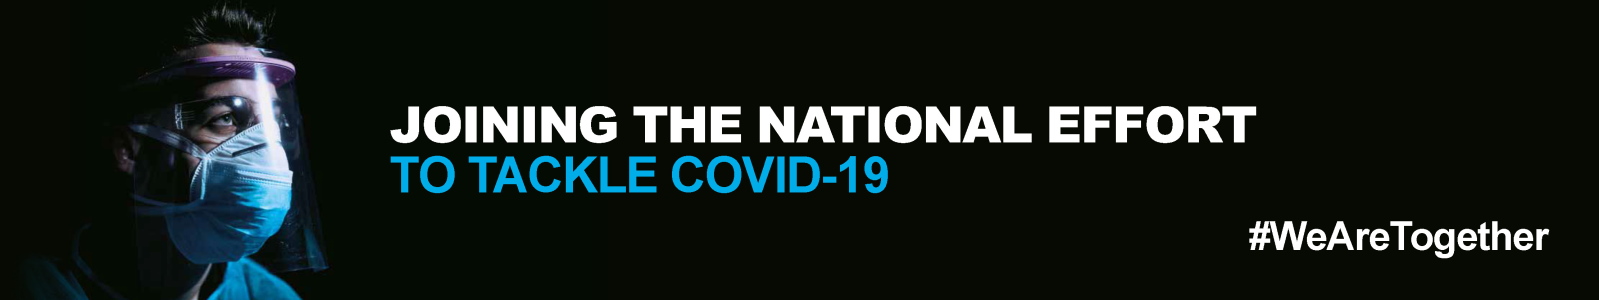 Joining the national effort to tackle Covid-19